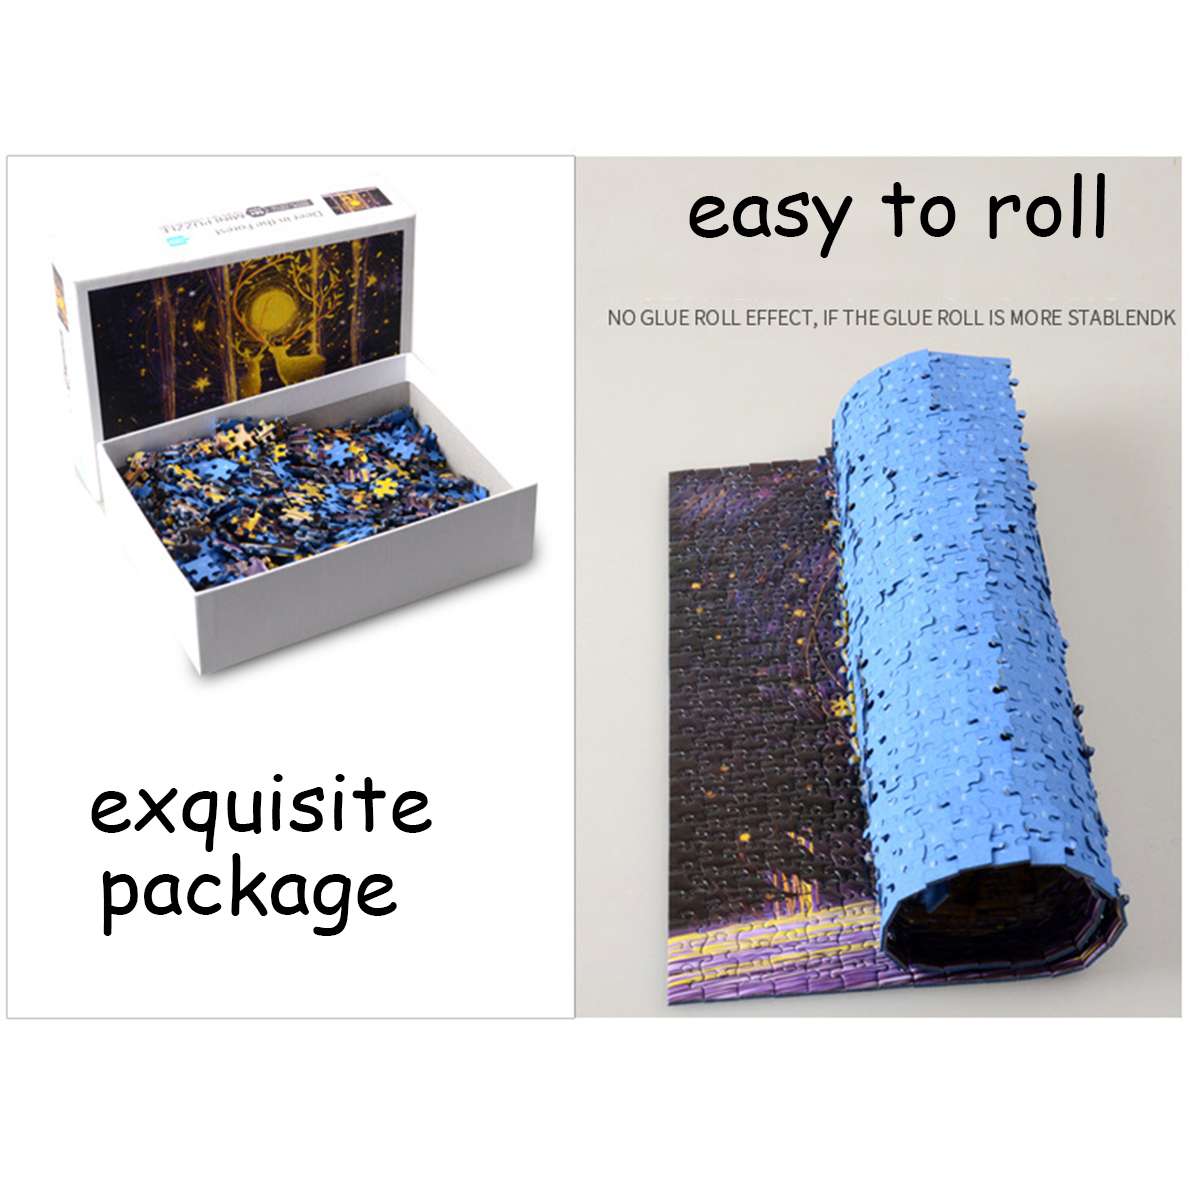 1000-Pieces-Nuit-Etoilee-DIY-Assembly-Jigsaw-Puzzles-Landscape-Picture-Educational-Games-Toy-for-Adu-1844620-7